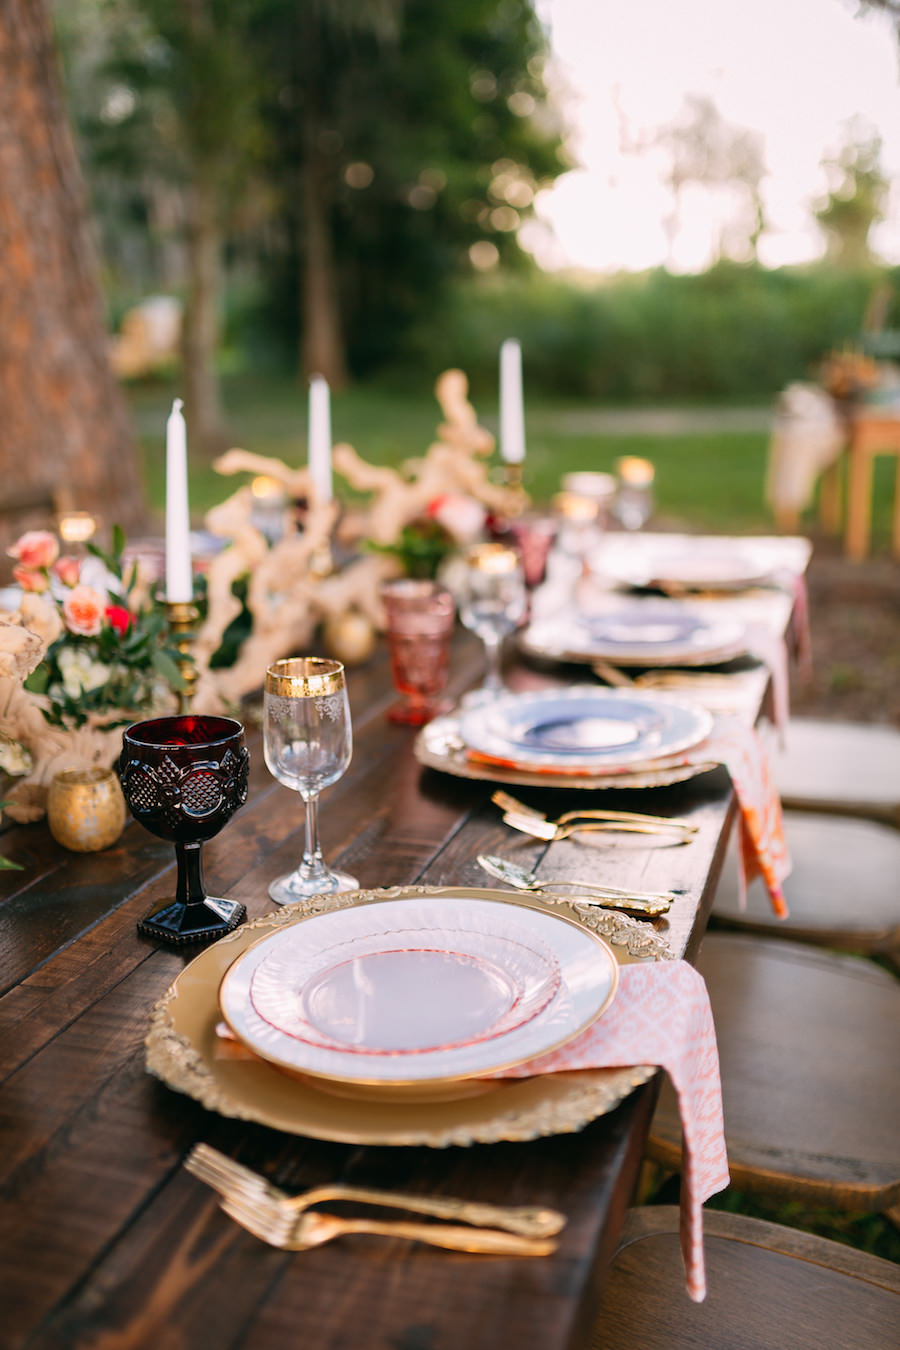 Boho Chic Wedding Reception Placesetting | Long Farm Table Feasting Table with Boho Chic Inspired Garland with Wooden Centerpiece and Vintage Glasses, Chargers and Cross Back Farm Chairs | Ever After Vintage Weddings Tampa Bay Wedding Rental Company